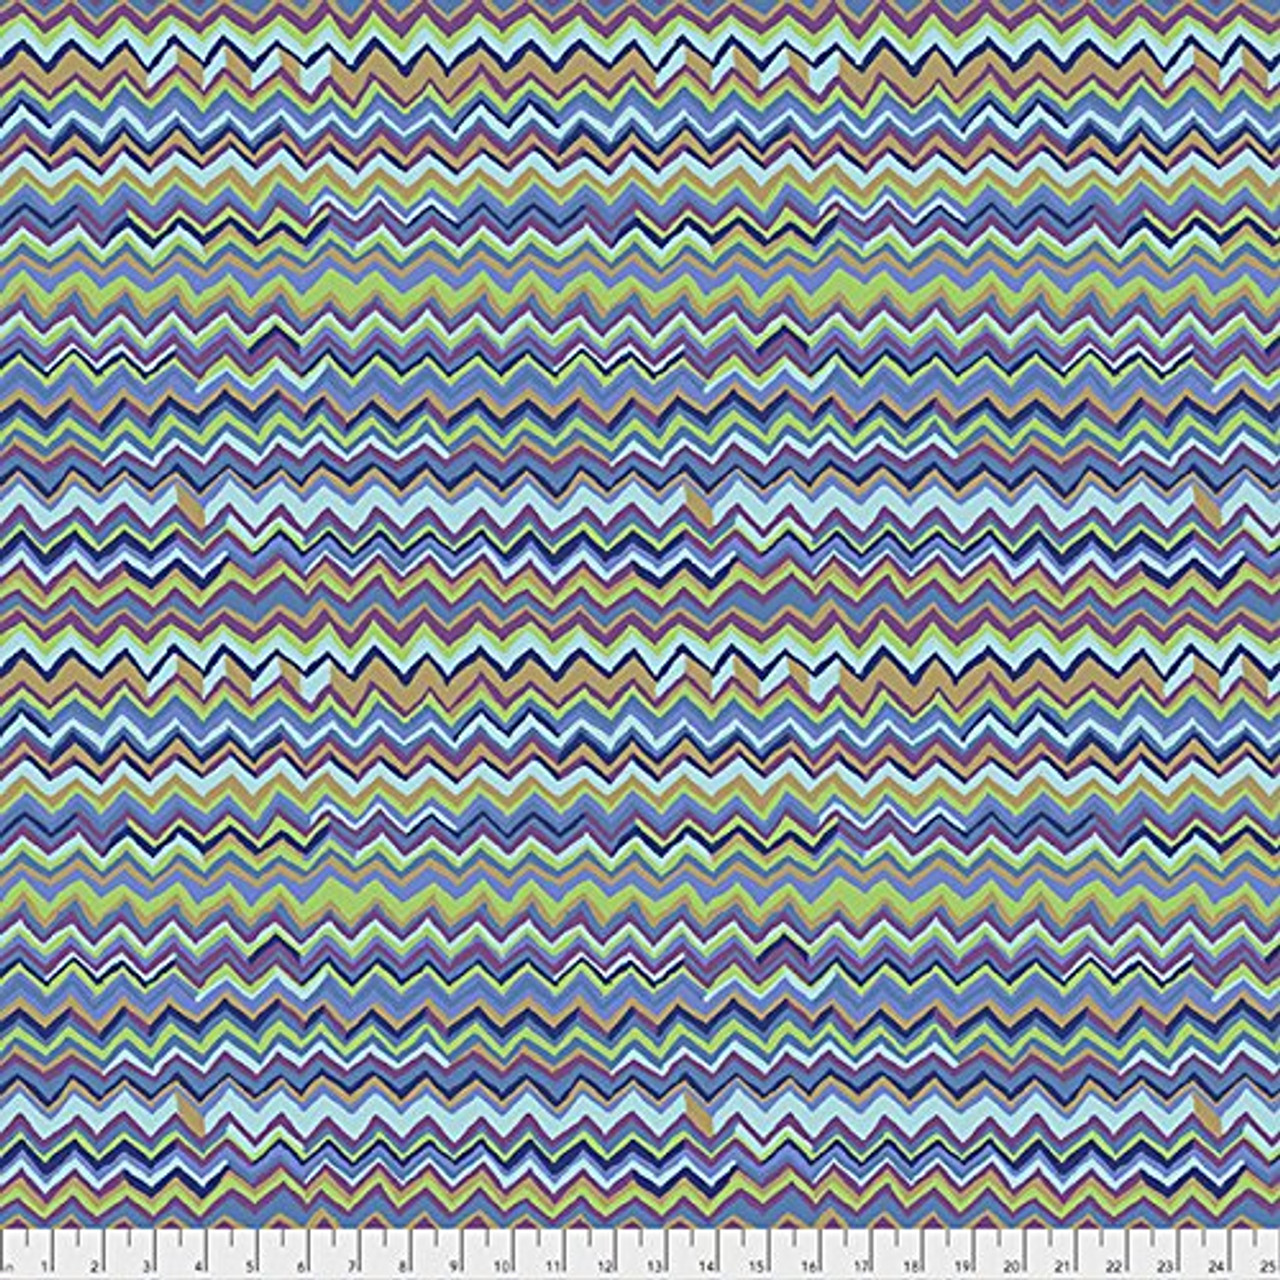 Brandon Mably PWBM043 Zig Zag Moody Quilting Cotton Fabric By The Yard